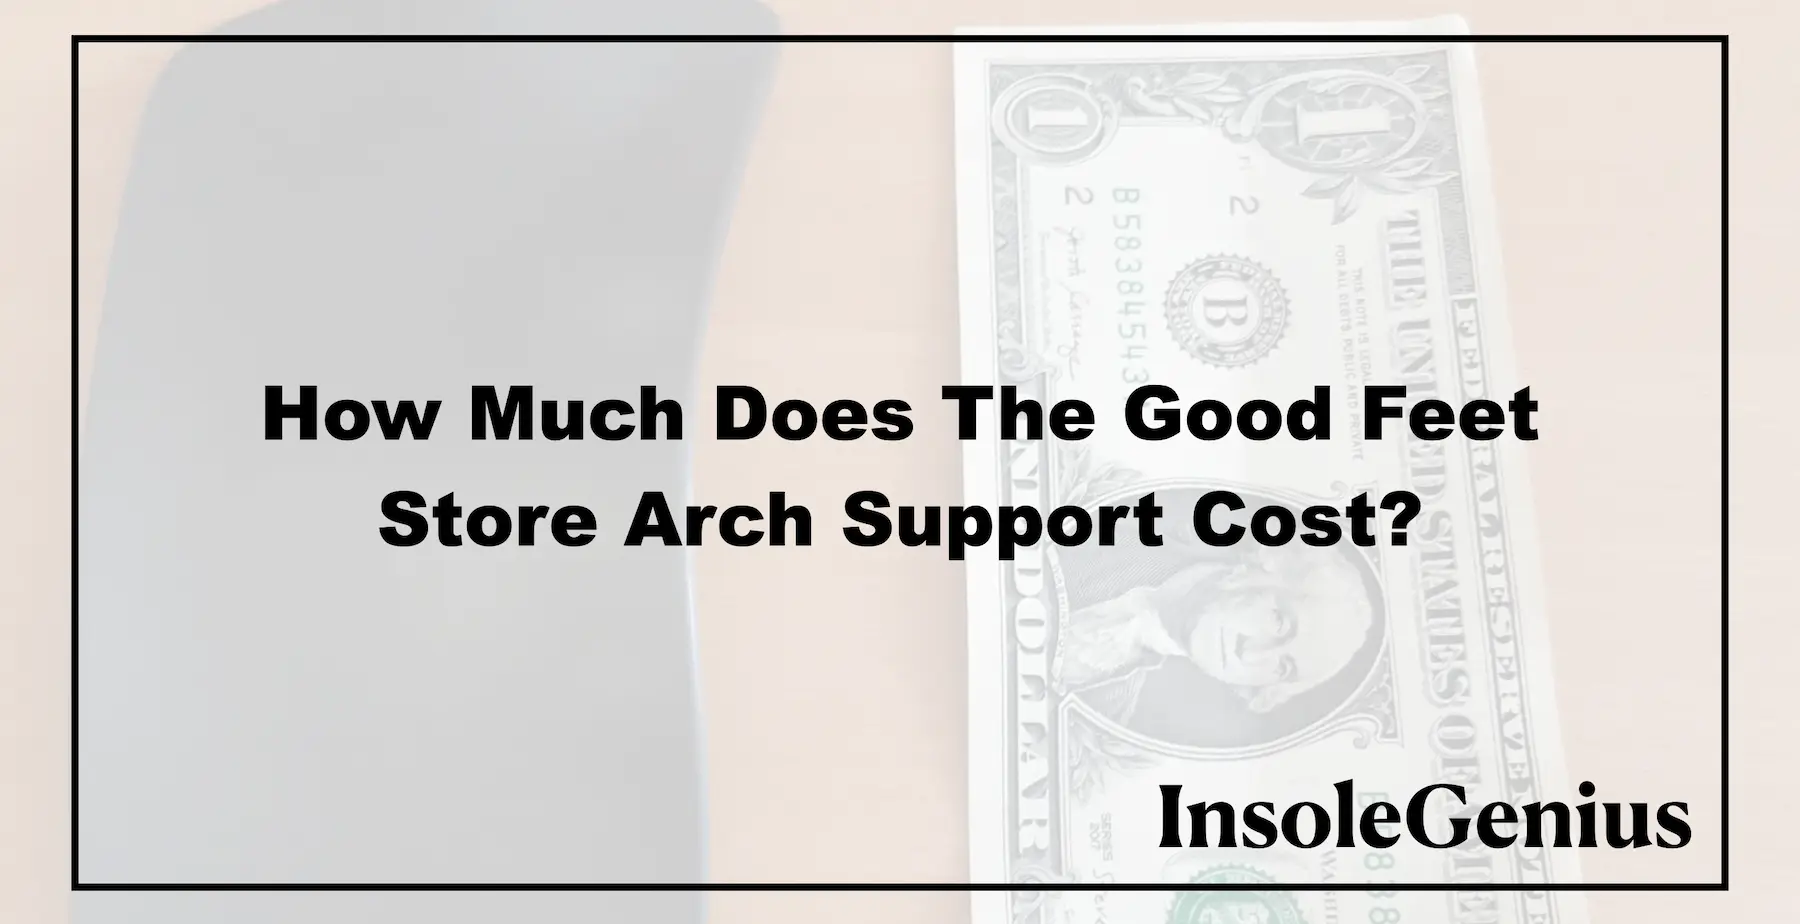 prices and discounts of the good feet store arch support